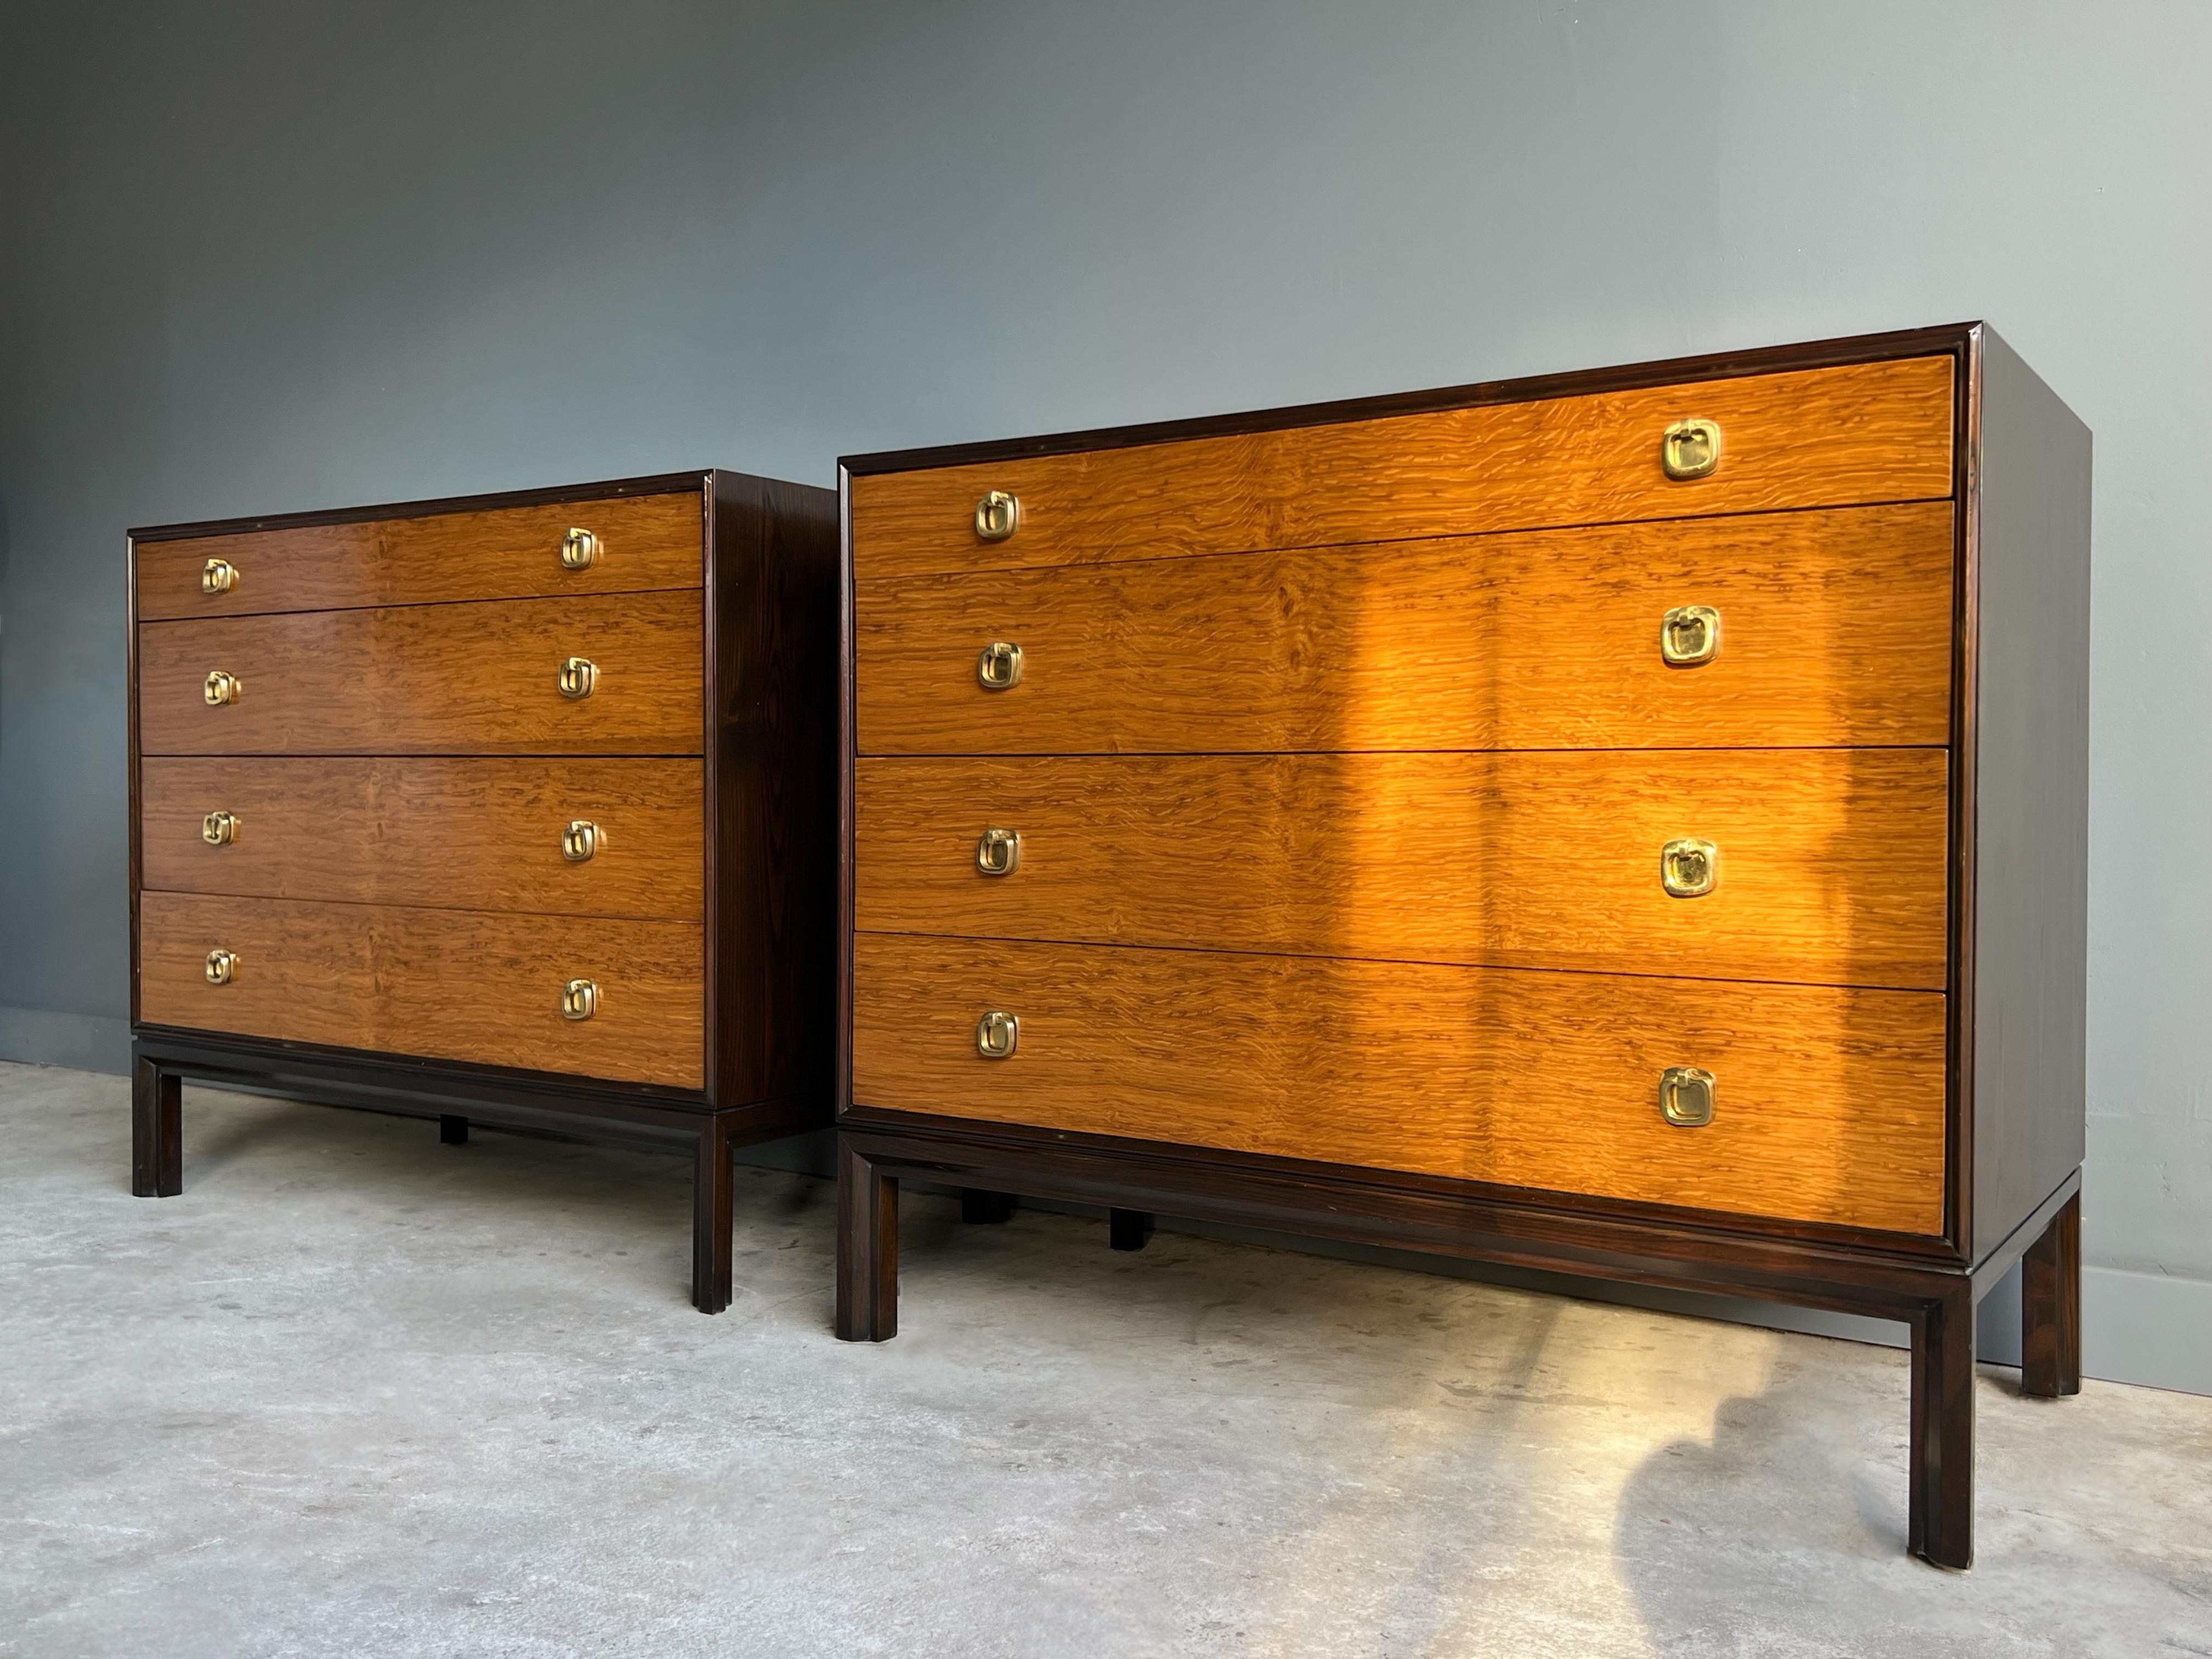 Pair of Dresser Chests by Edward Wormley for Dunbar 1